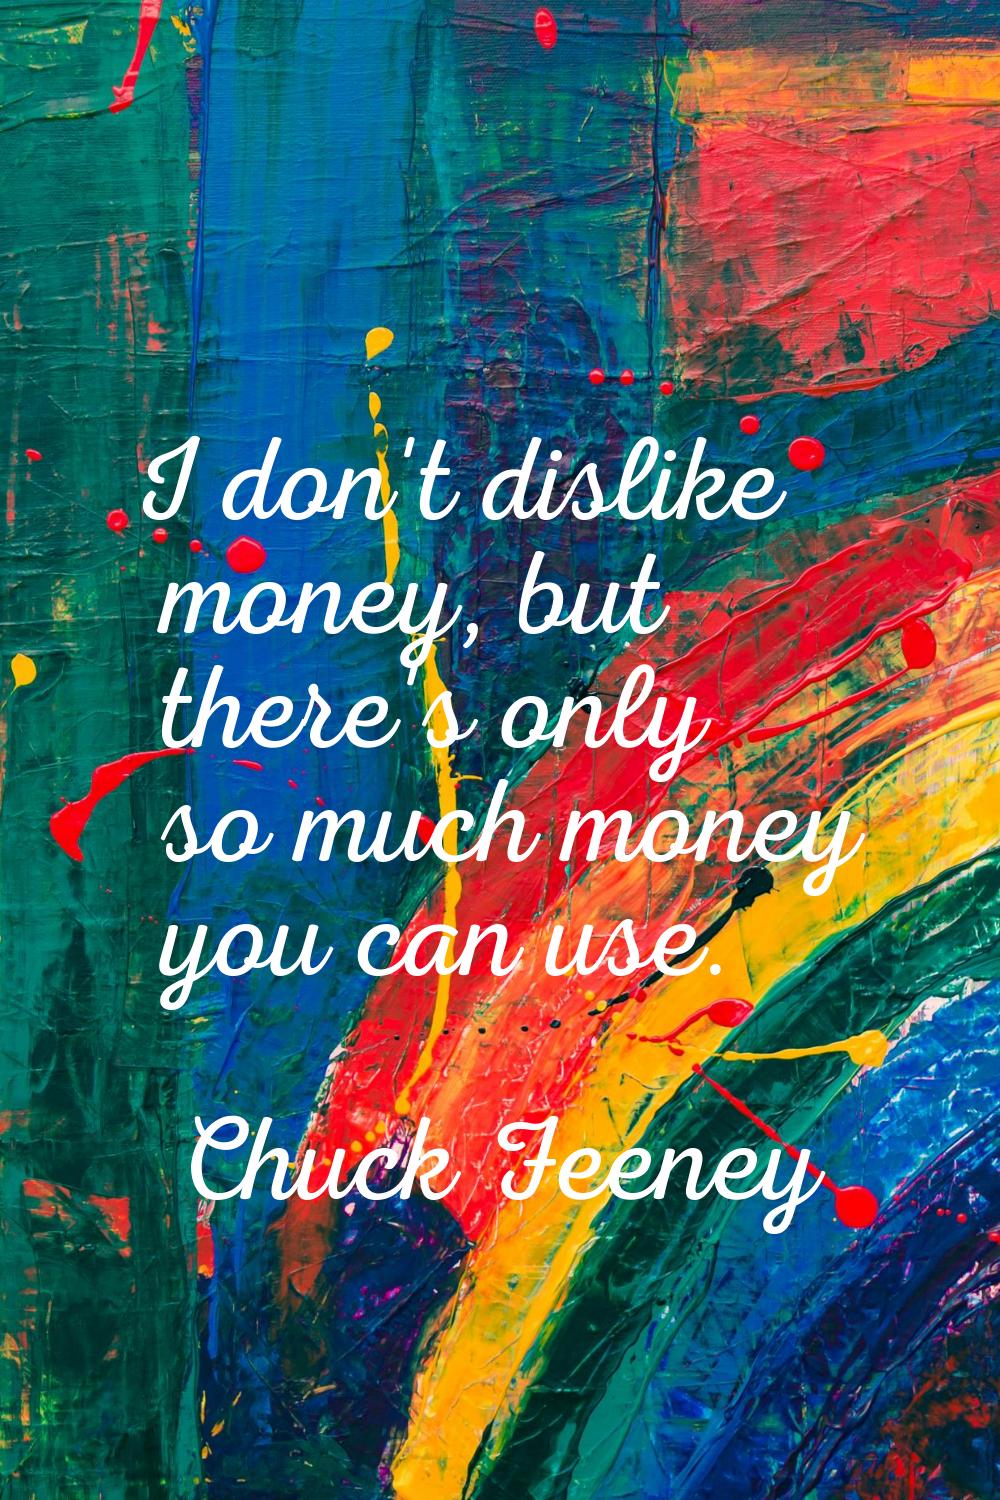 I don't dislike money, but there's only so much money you can use.